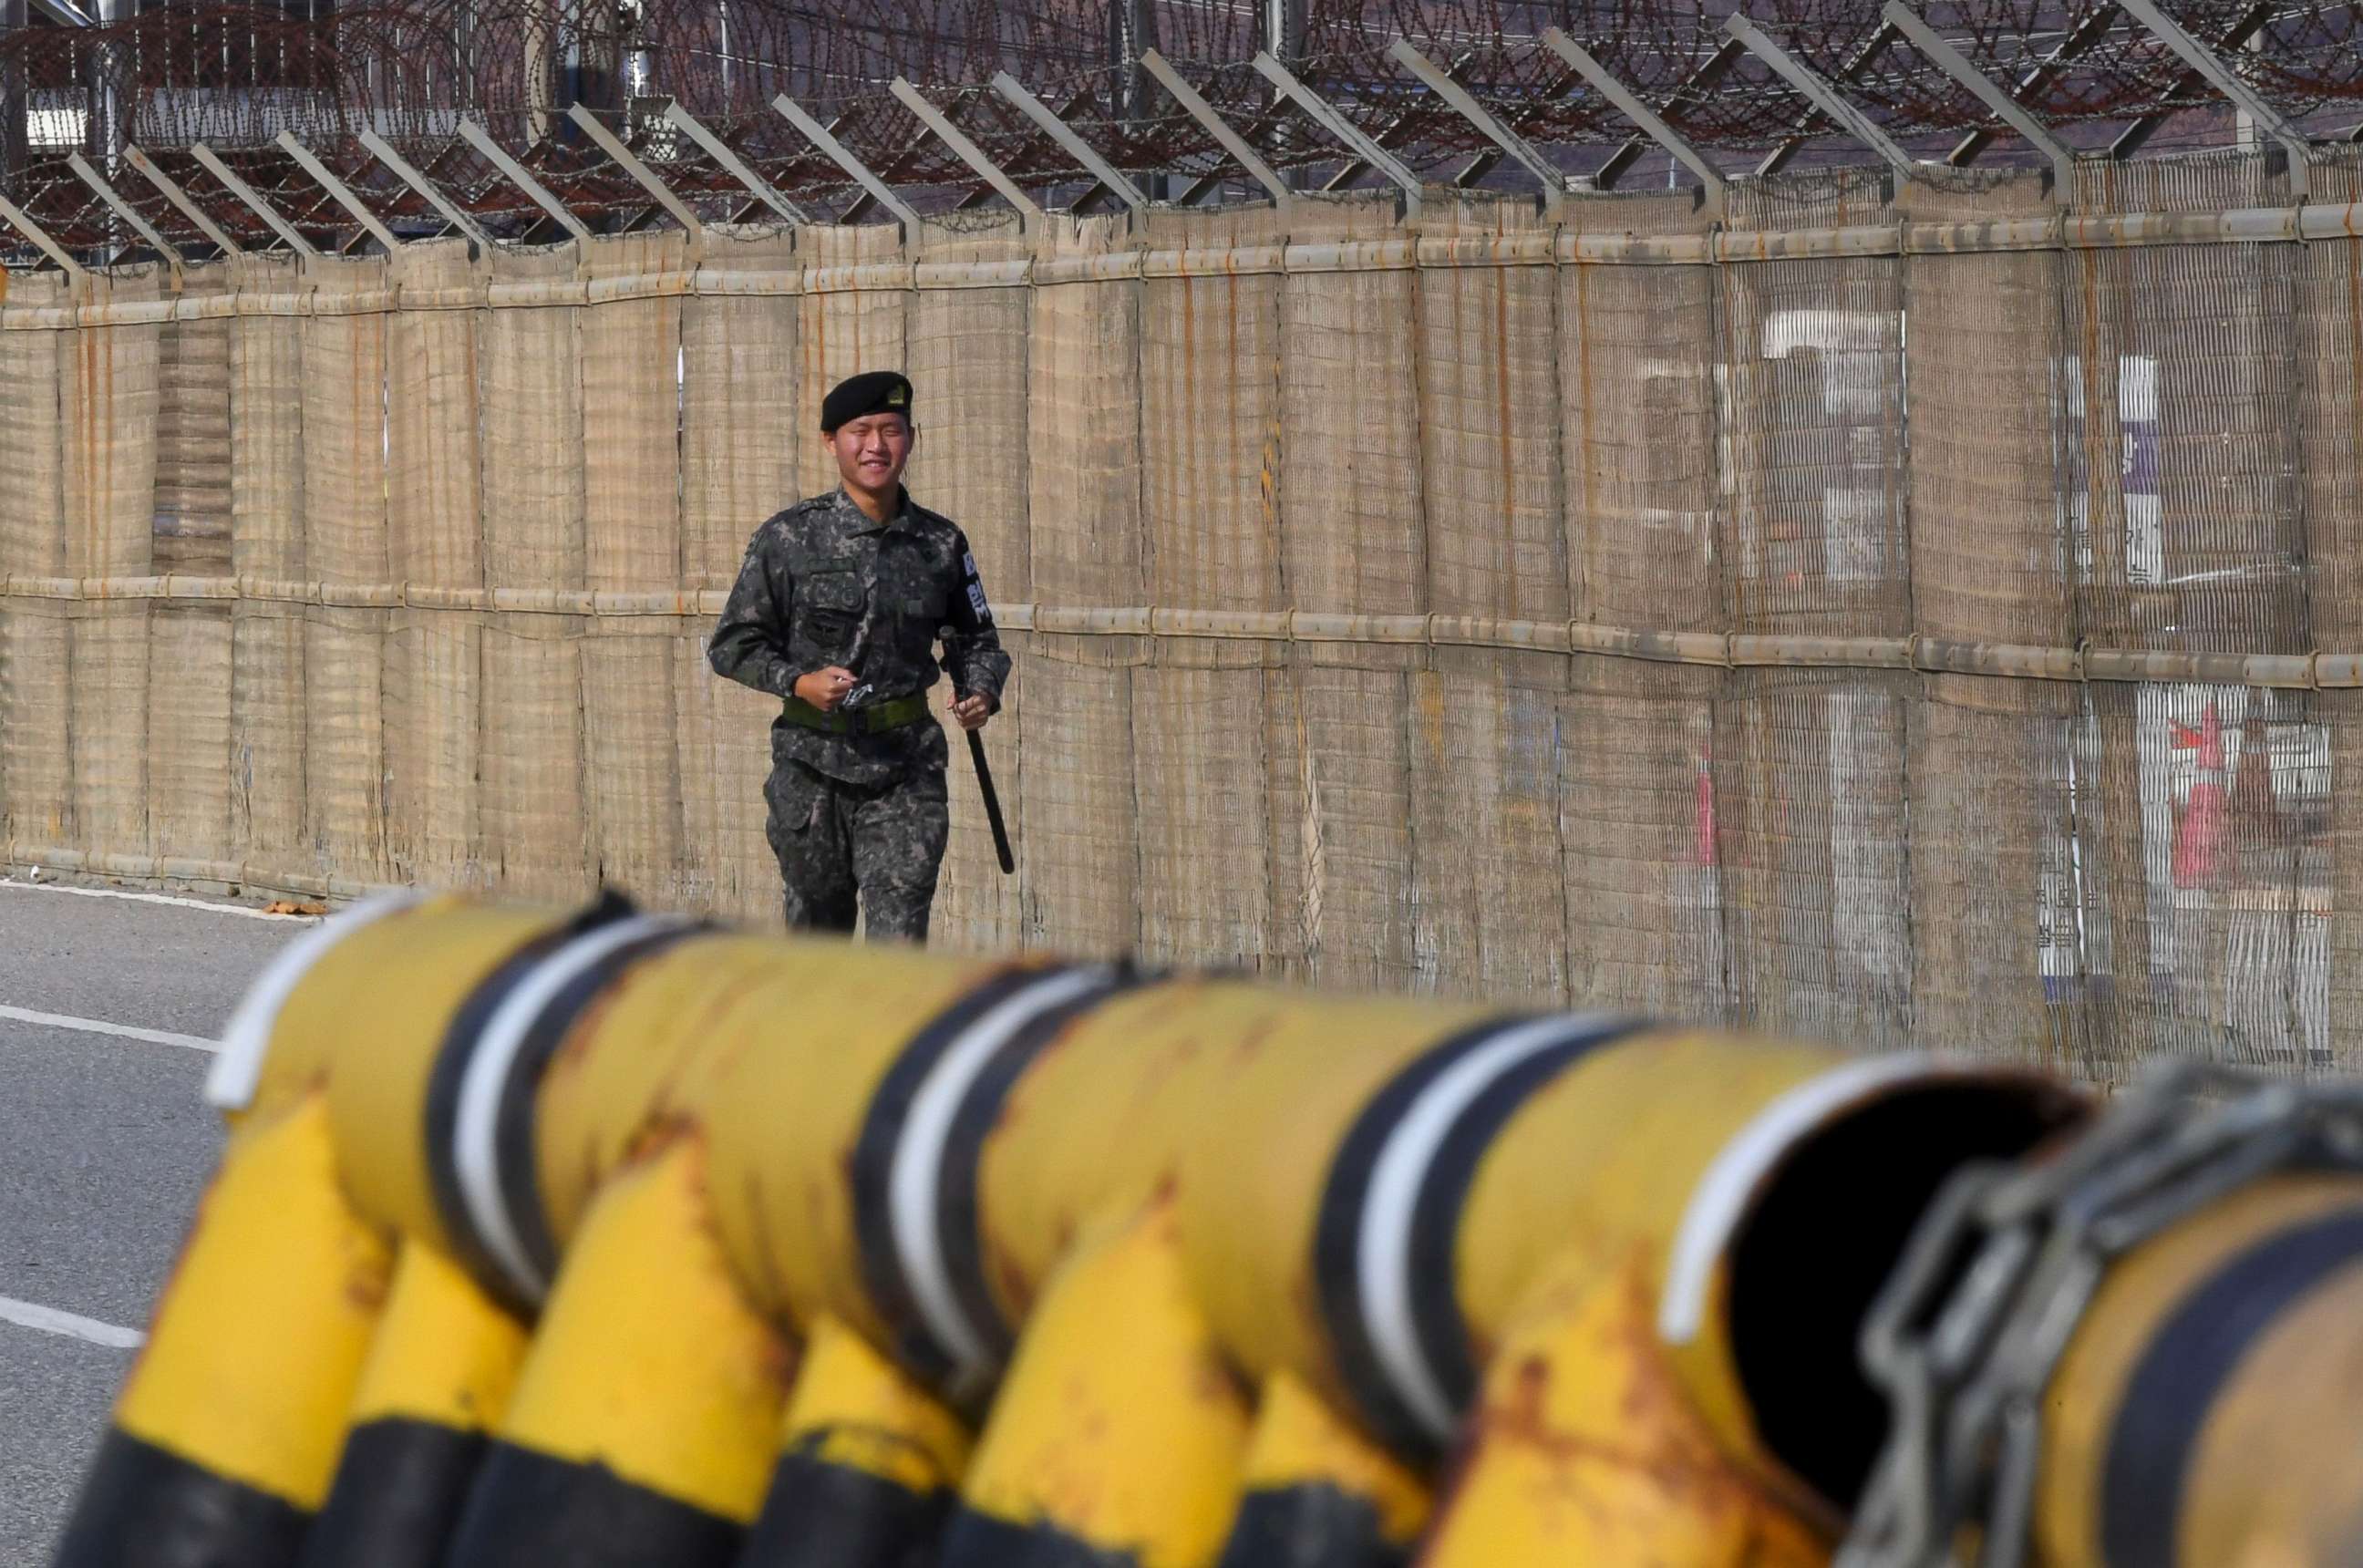 PHOTO: A South Korean soldier runs along a military fence on the road leading to the truce village of Panmunjom at a South Korean military checkpoint in the border city of Paju near the Demilitarized Zone (DMZ) dividing the two Koreas, Nov. 14, 2017.